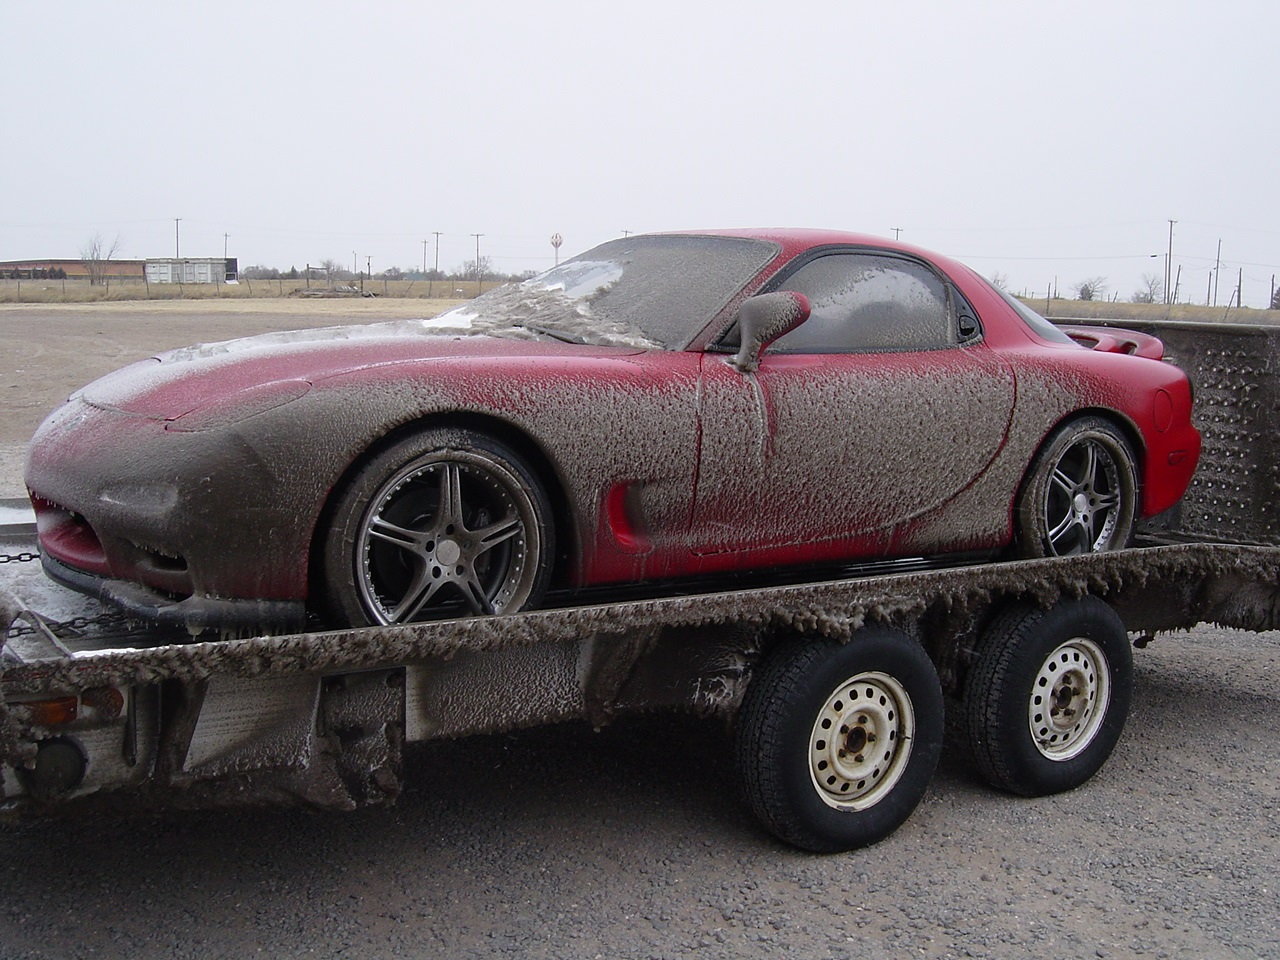 How I Lived My Dream of Driving a 500-HP Mazda RX-7 at the